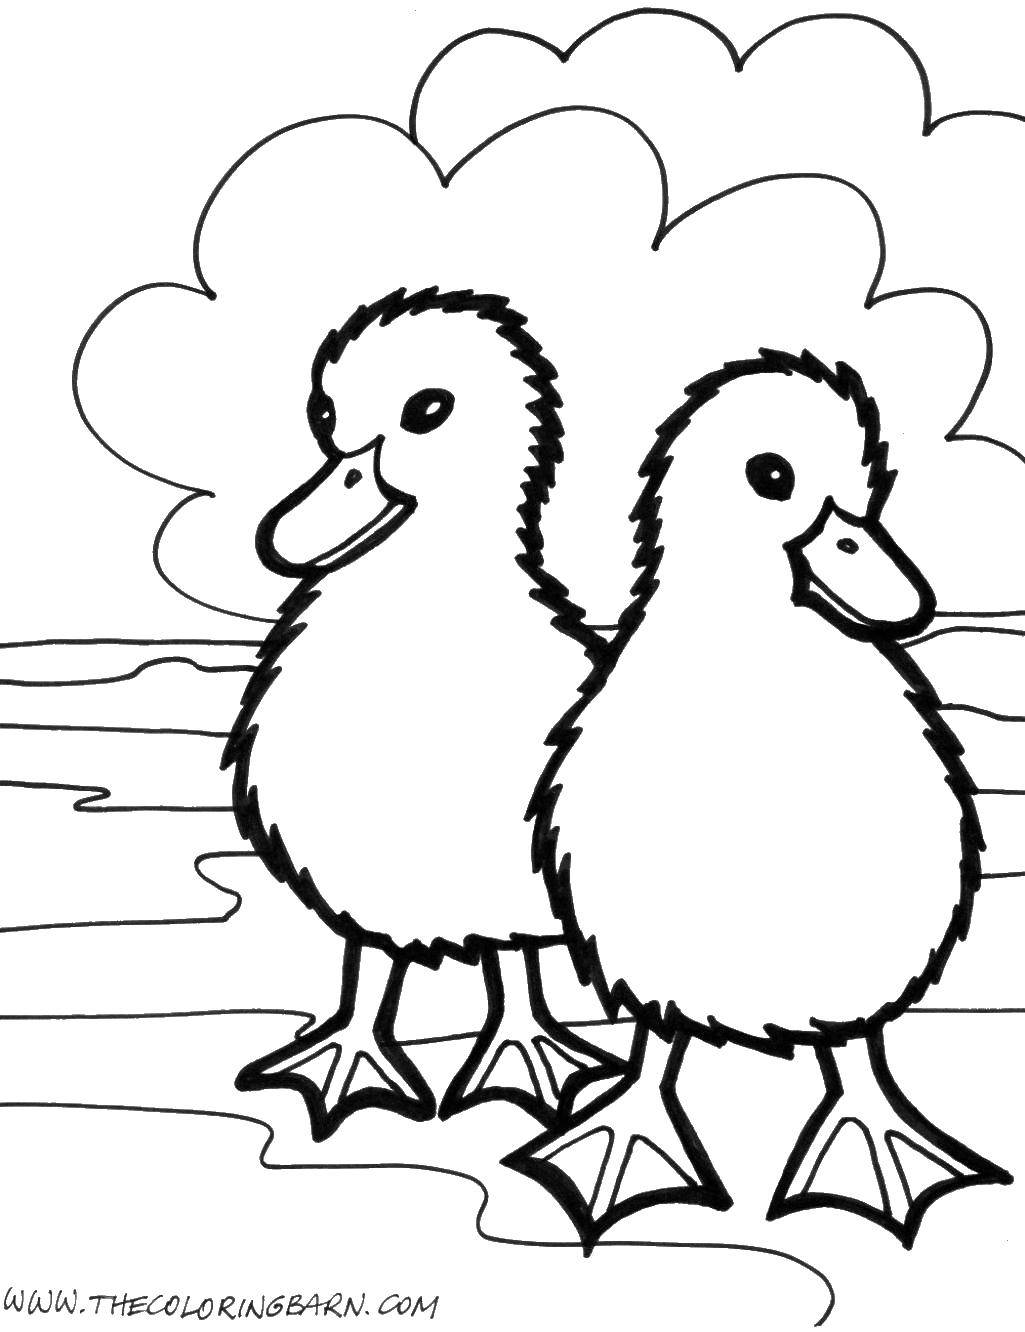 Coloring Two duckling. Category birds. Tags:  Poultry, duck.